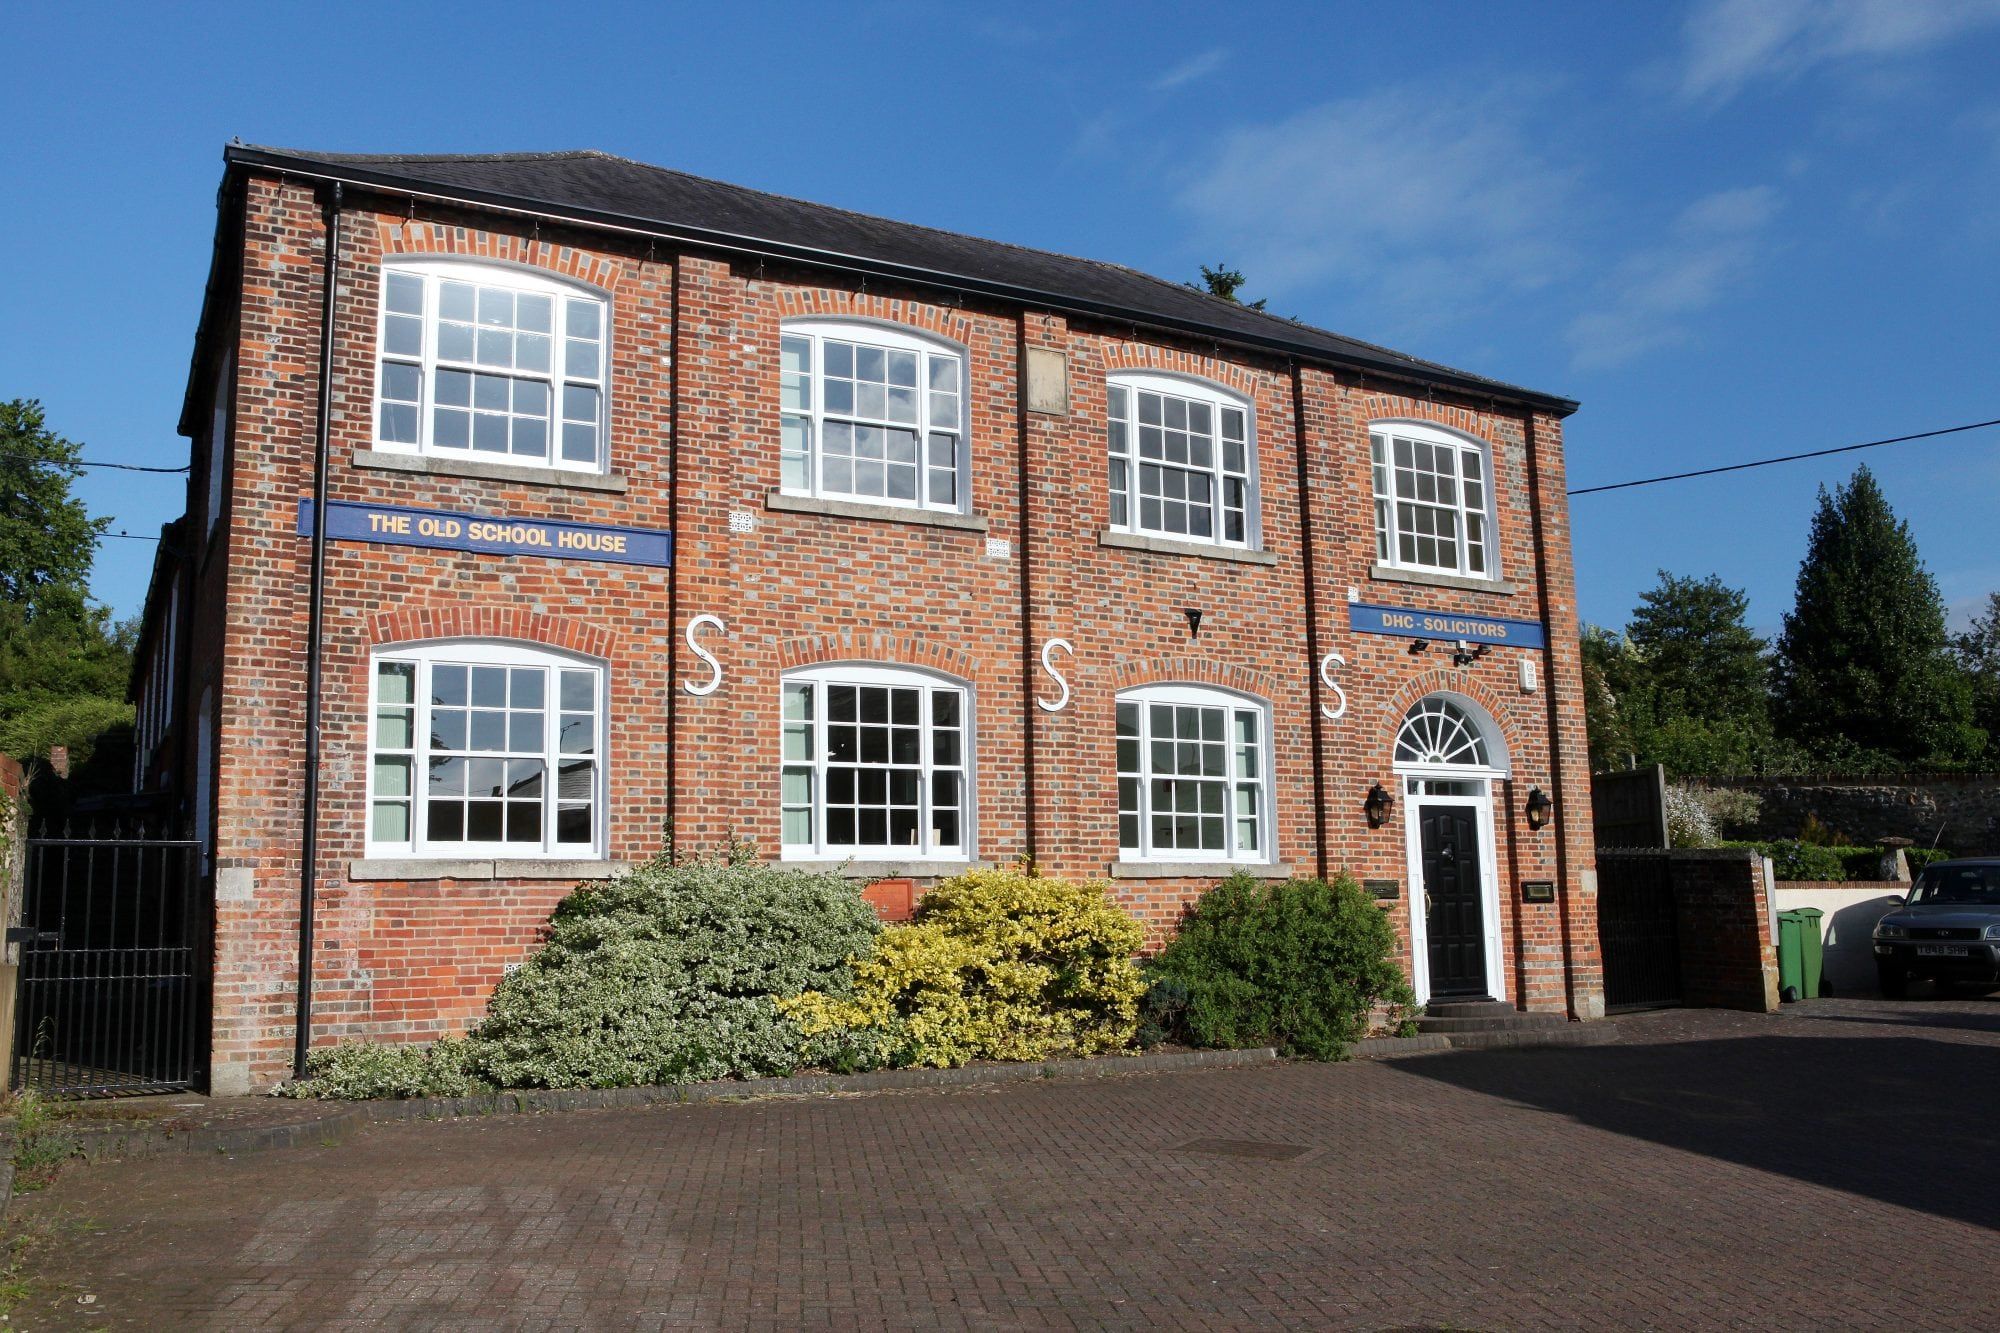 The Hungerford offices in the old schoolhouse of  Dickins Hopgood Chidley Solicitors